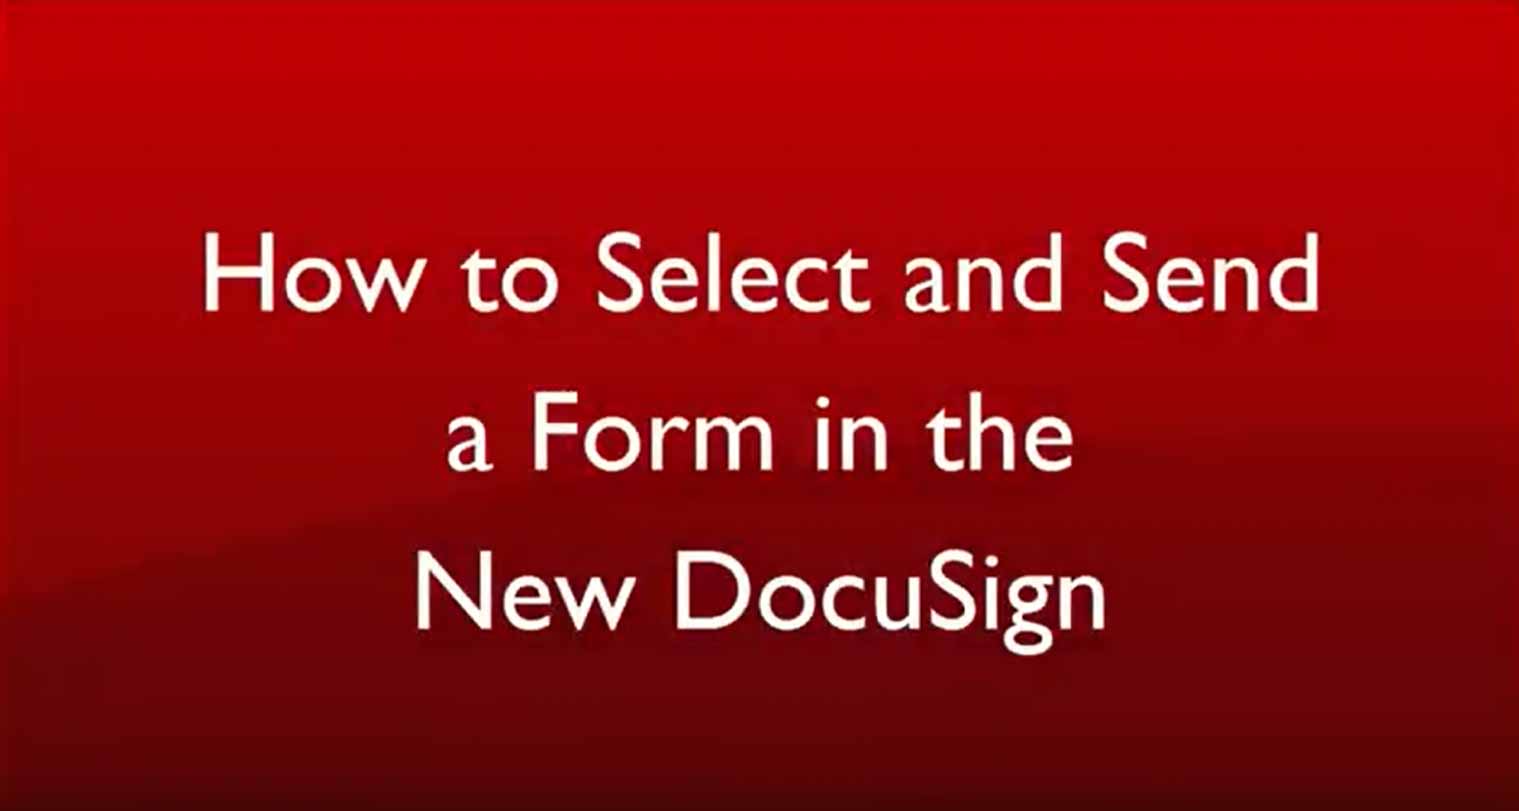 How to select and send a form through docusign.